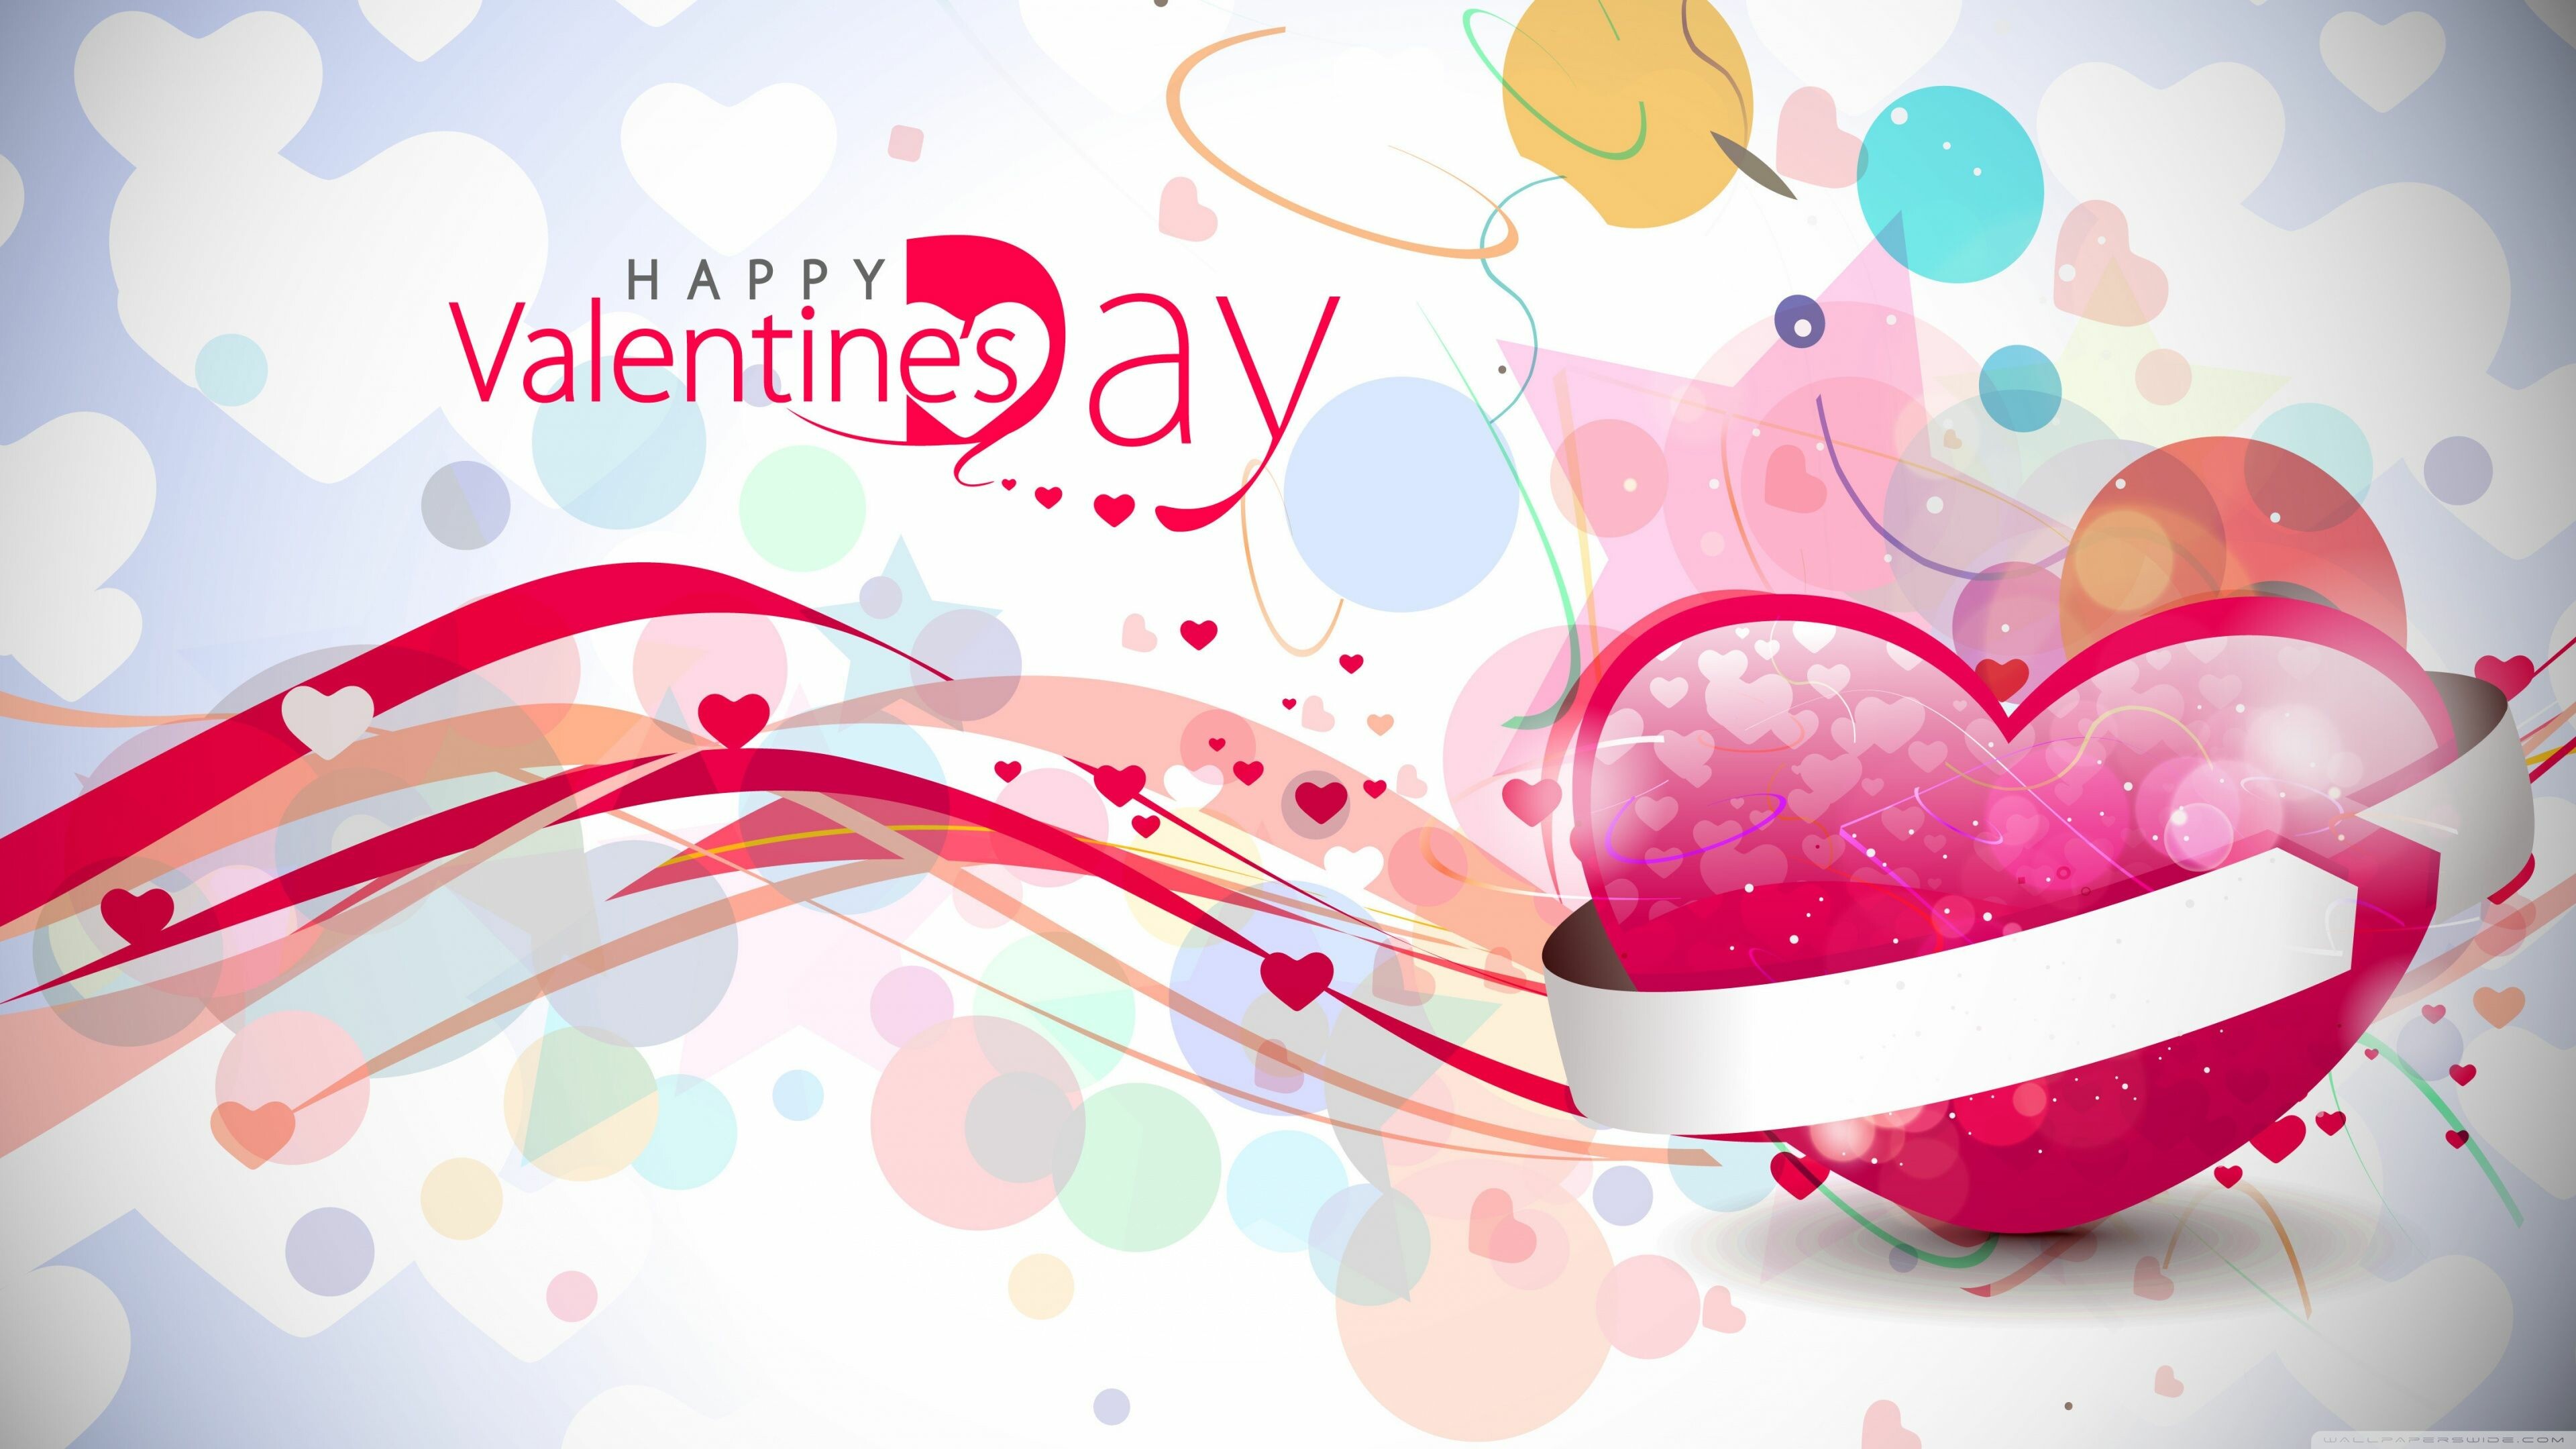 300+] Valentines Day Wallpapers | Wallpapers.com